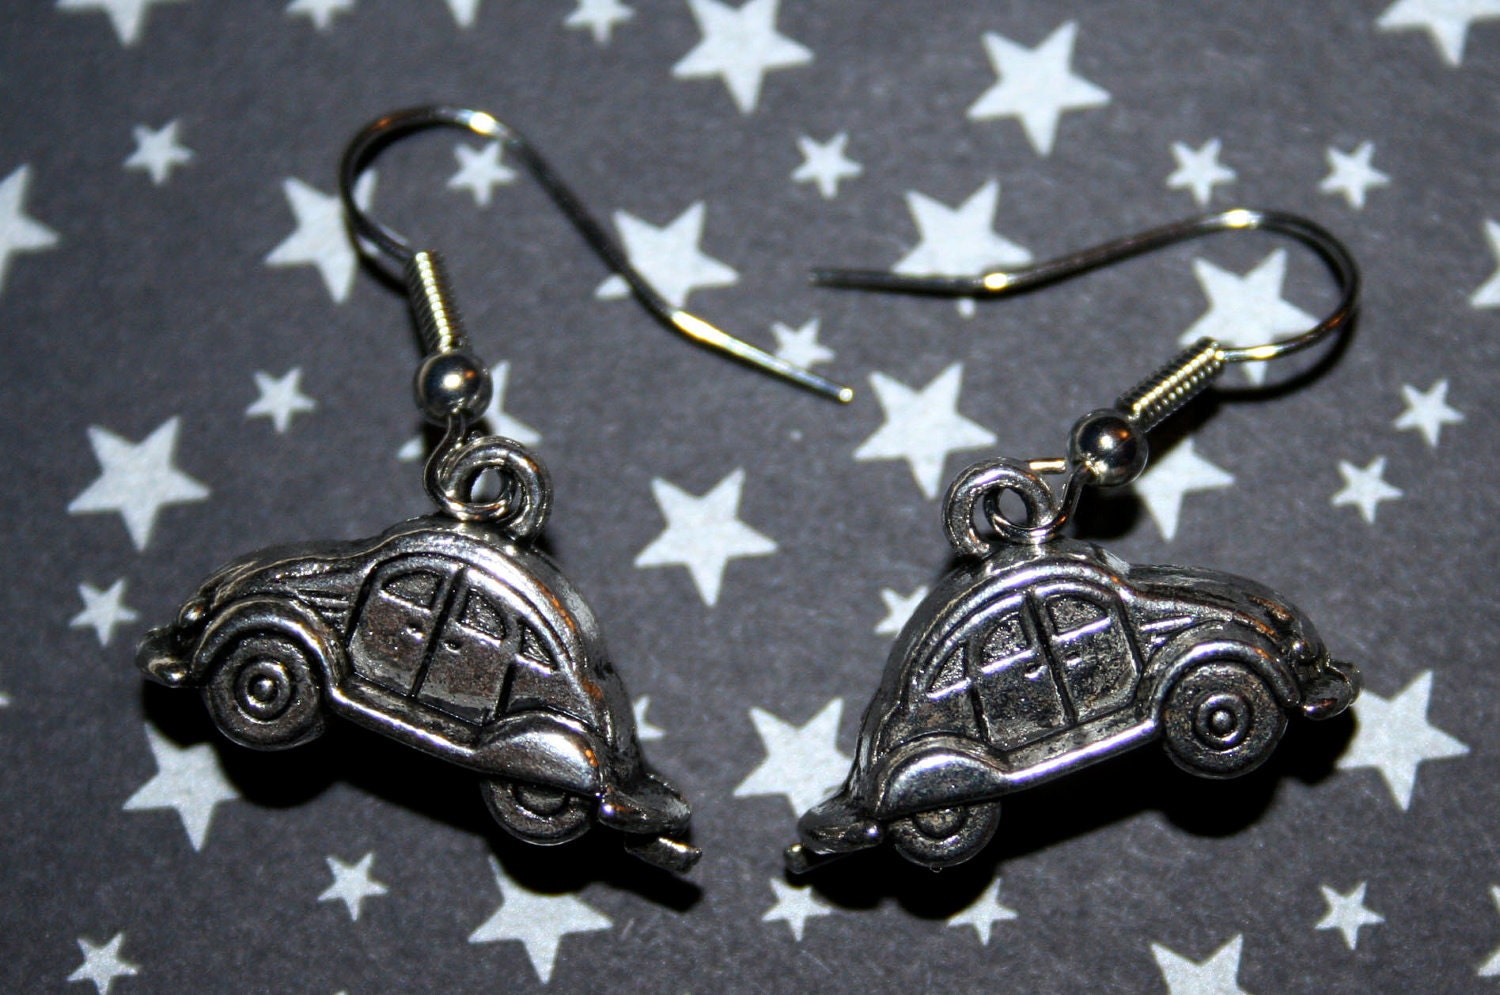 These are a pair of adorable Volkswagen beetle earrings